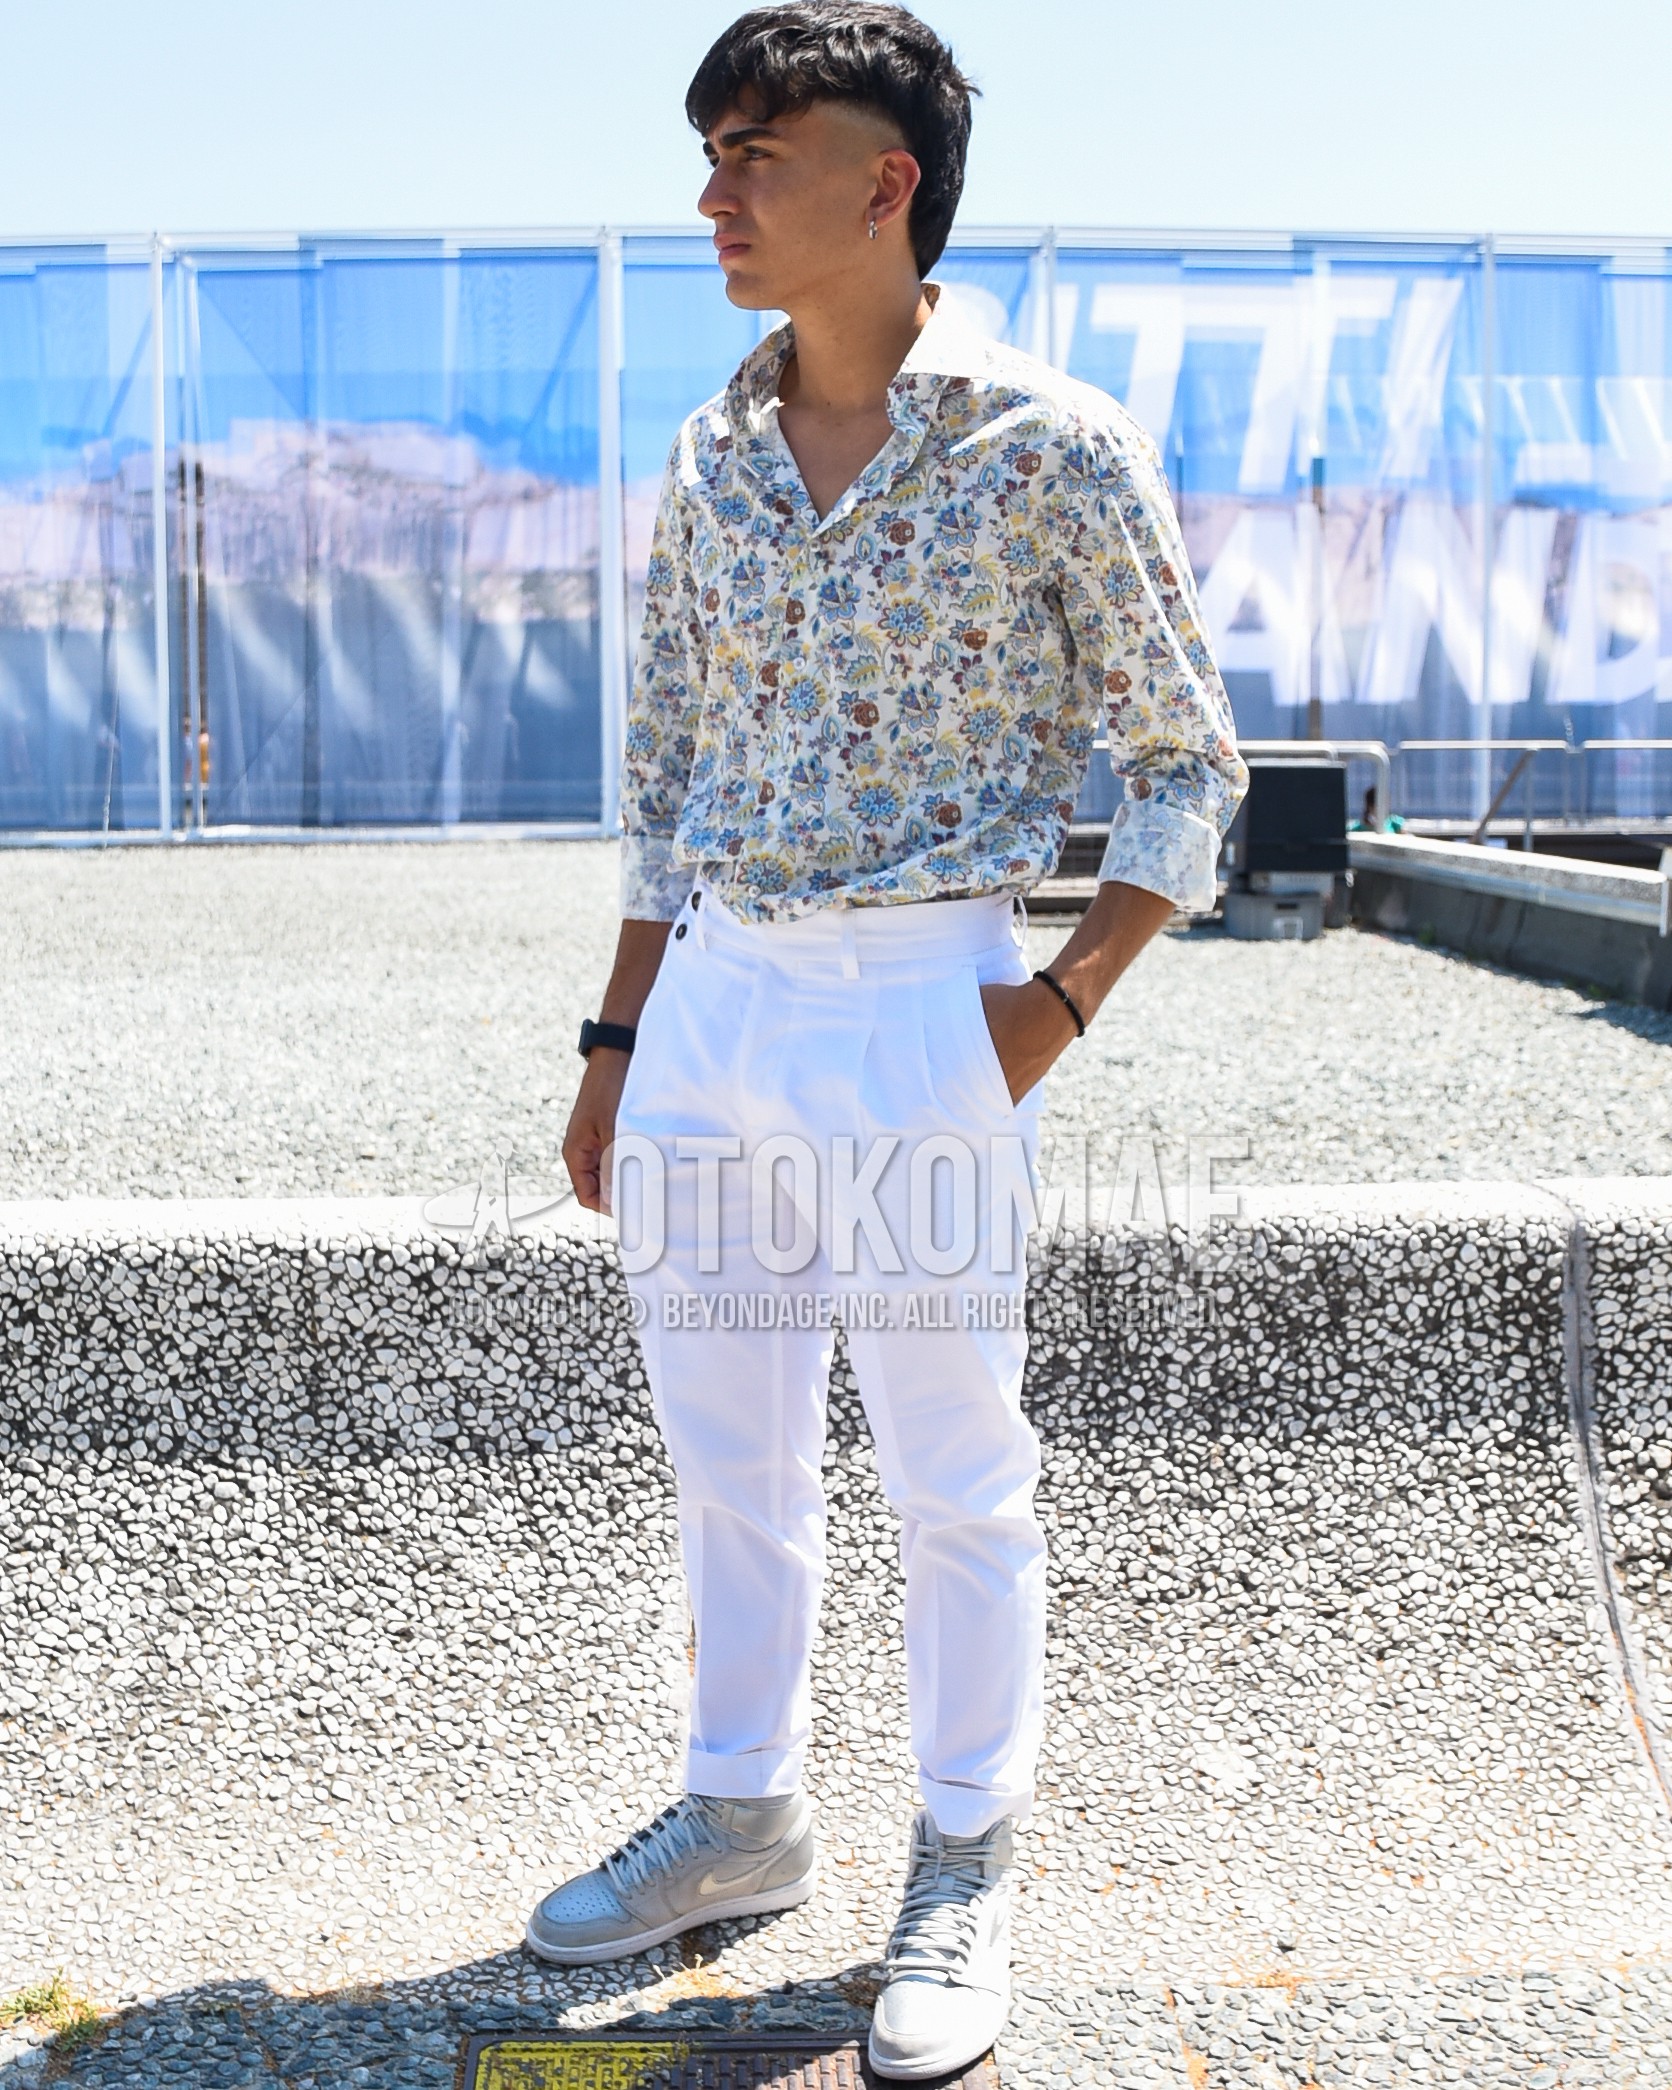 Men's spring summer outfit with white tops/innerwear shirt, white plain slacks, silver high-cut sneakers.